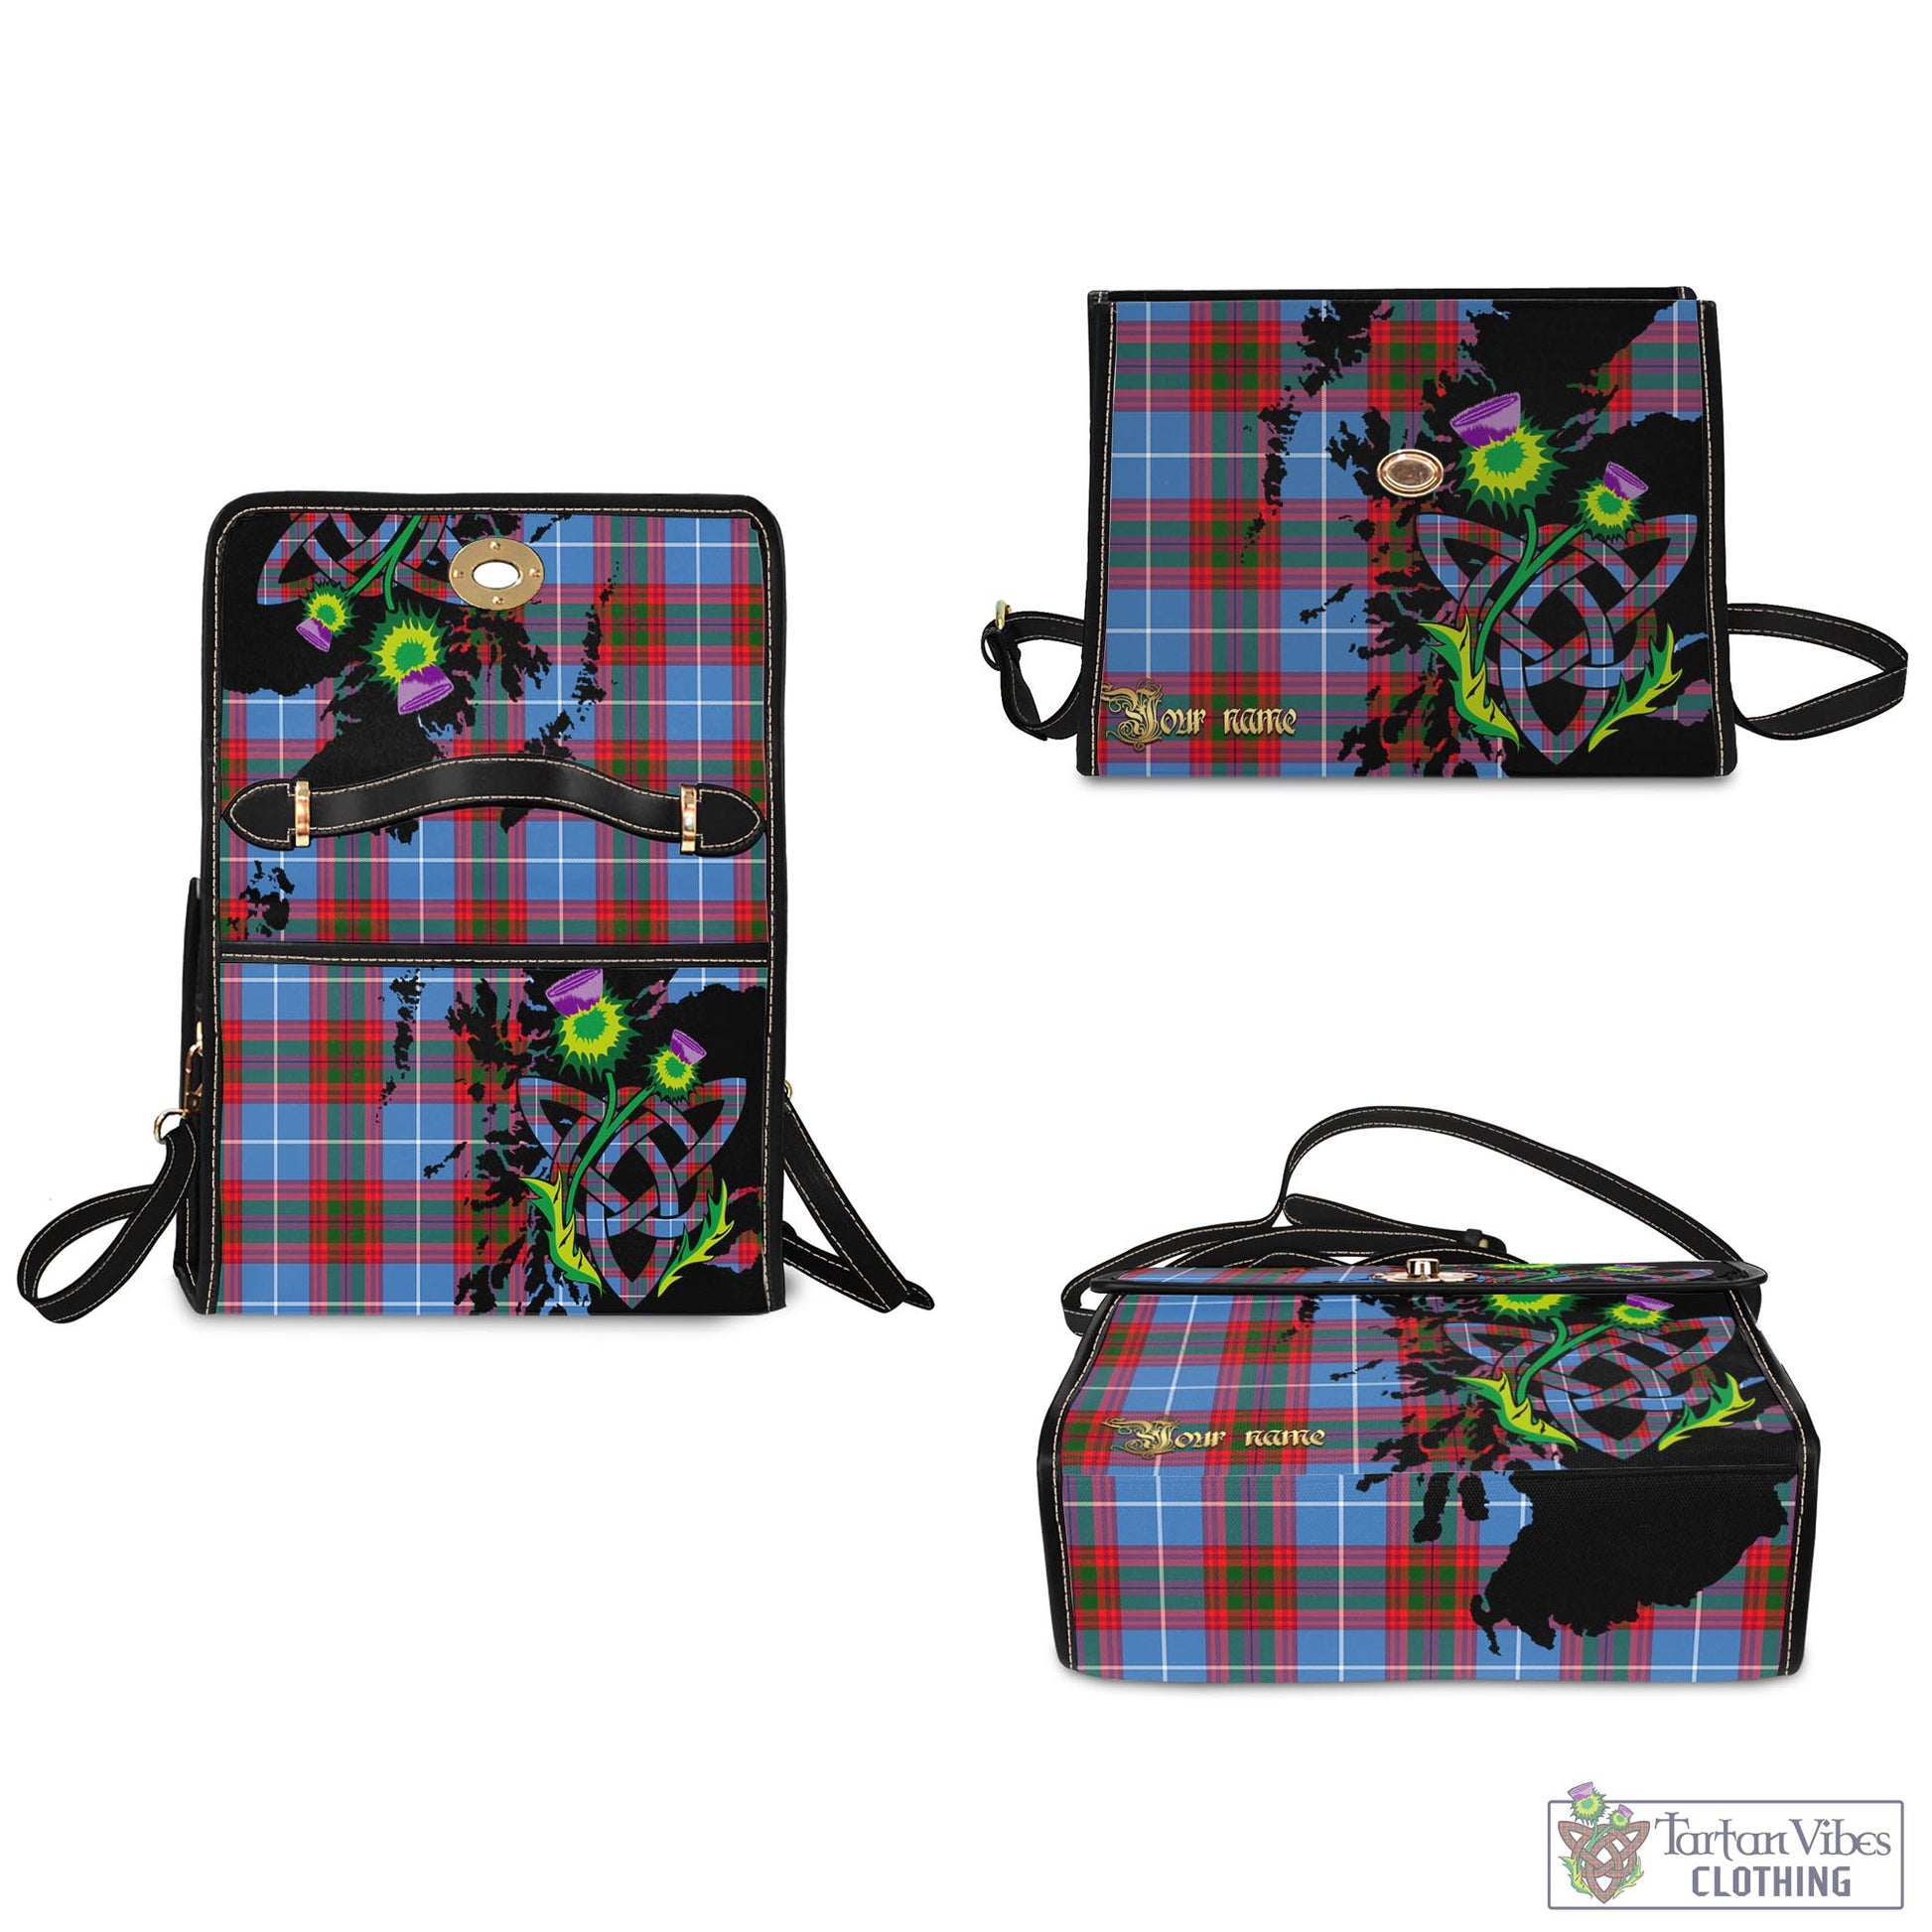 Tartan Vibes Clothing Dalmahoy Tartan Waterproof Canvas Bag with Scotland Map and Thistle Celtic Accents